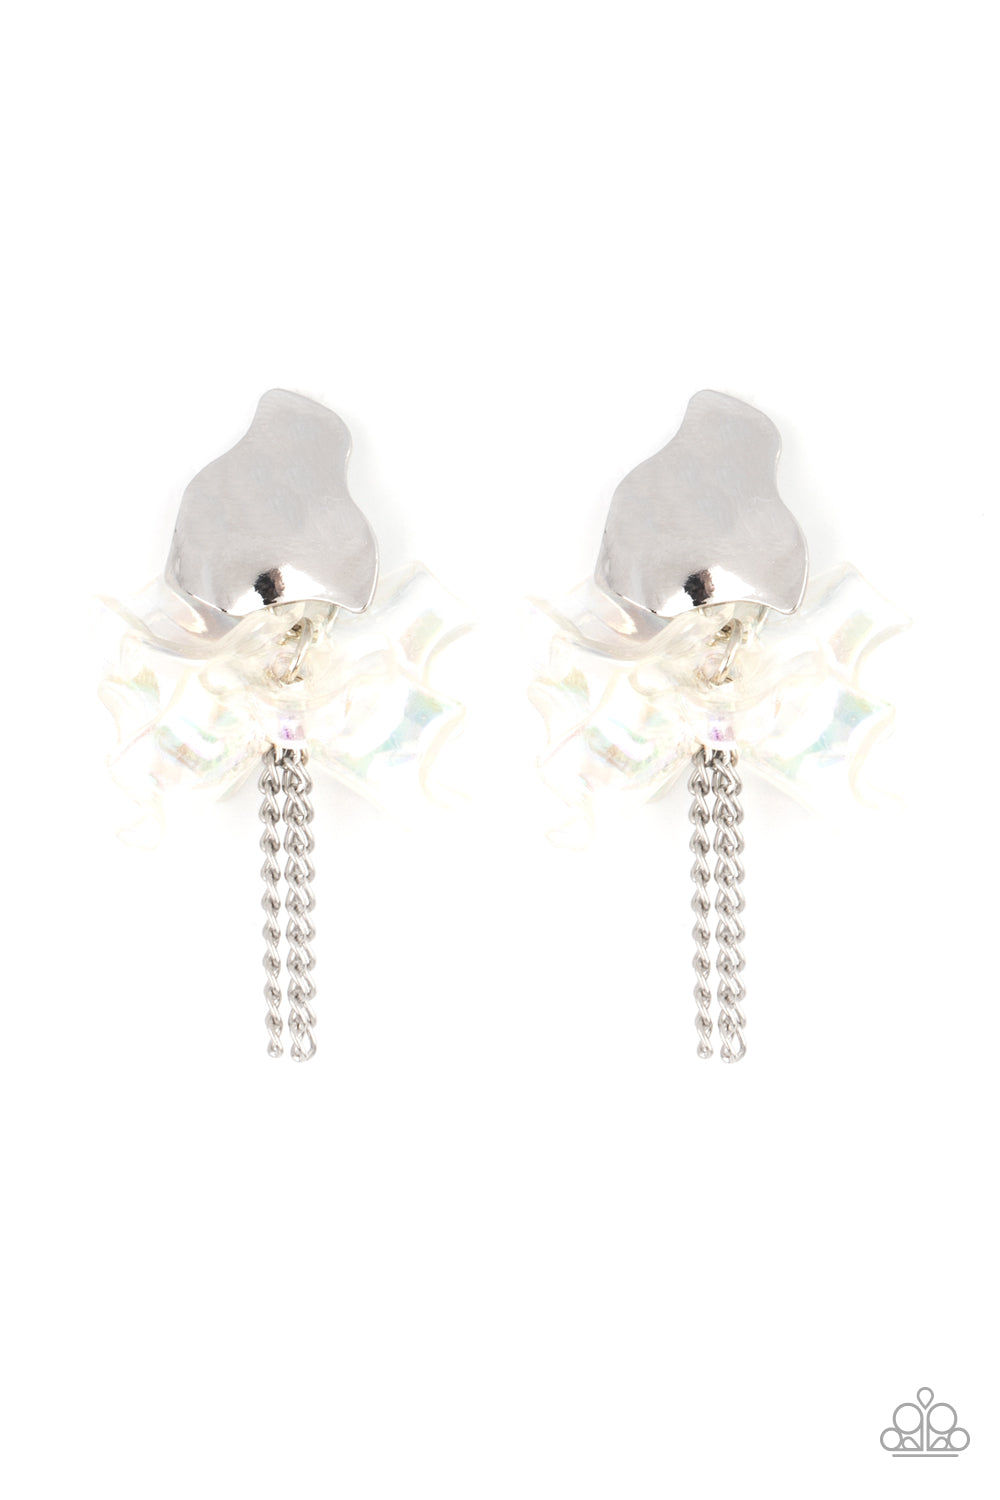 Harmonically Holographic White Post Earring - Paparazzi Accessories  Dainty silver chains stream out from the bottom of iridescent acrylic petal-like frames that attach to an asymmetrical silver frame, creating an enchanting cluster. Earring attaches to a standard post fitting.  All Paparazzi Accessories are lead free and nickel free!  Sold as one pair of post earrings.